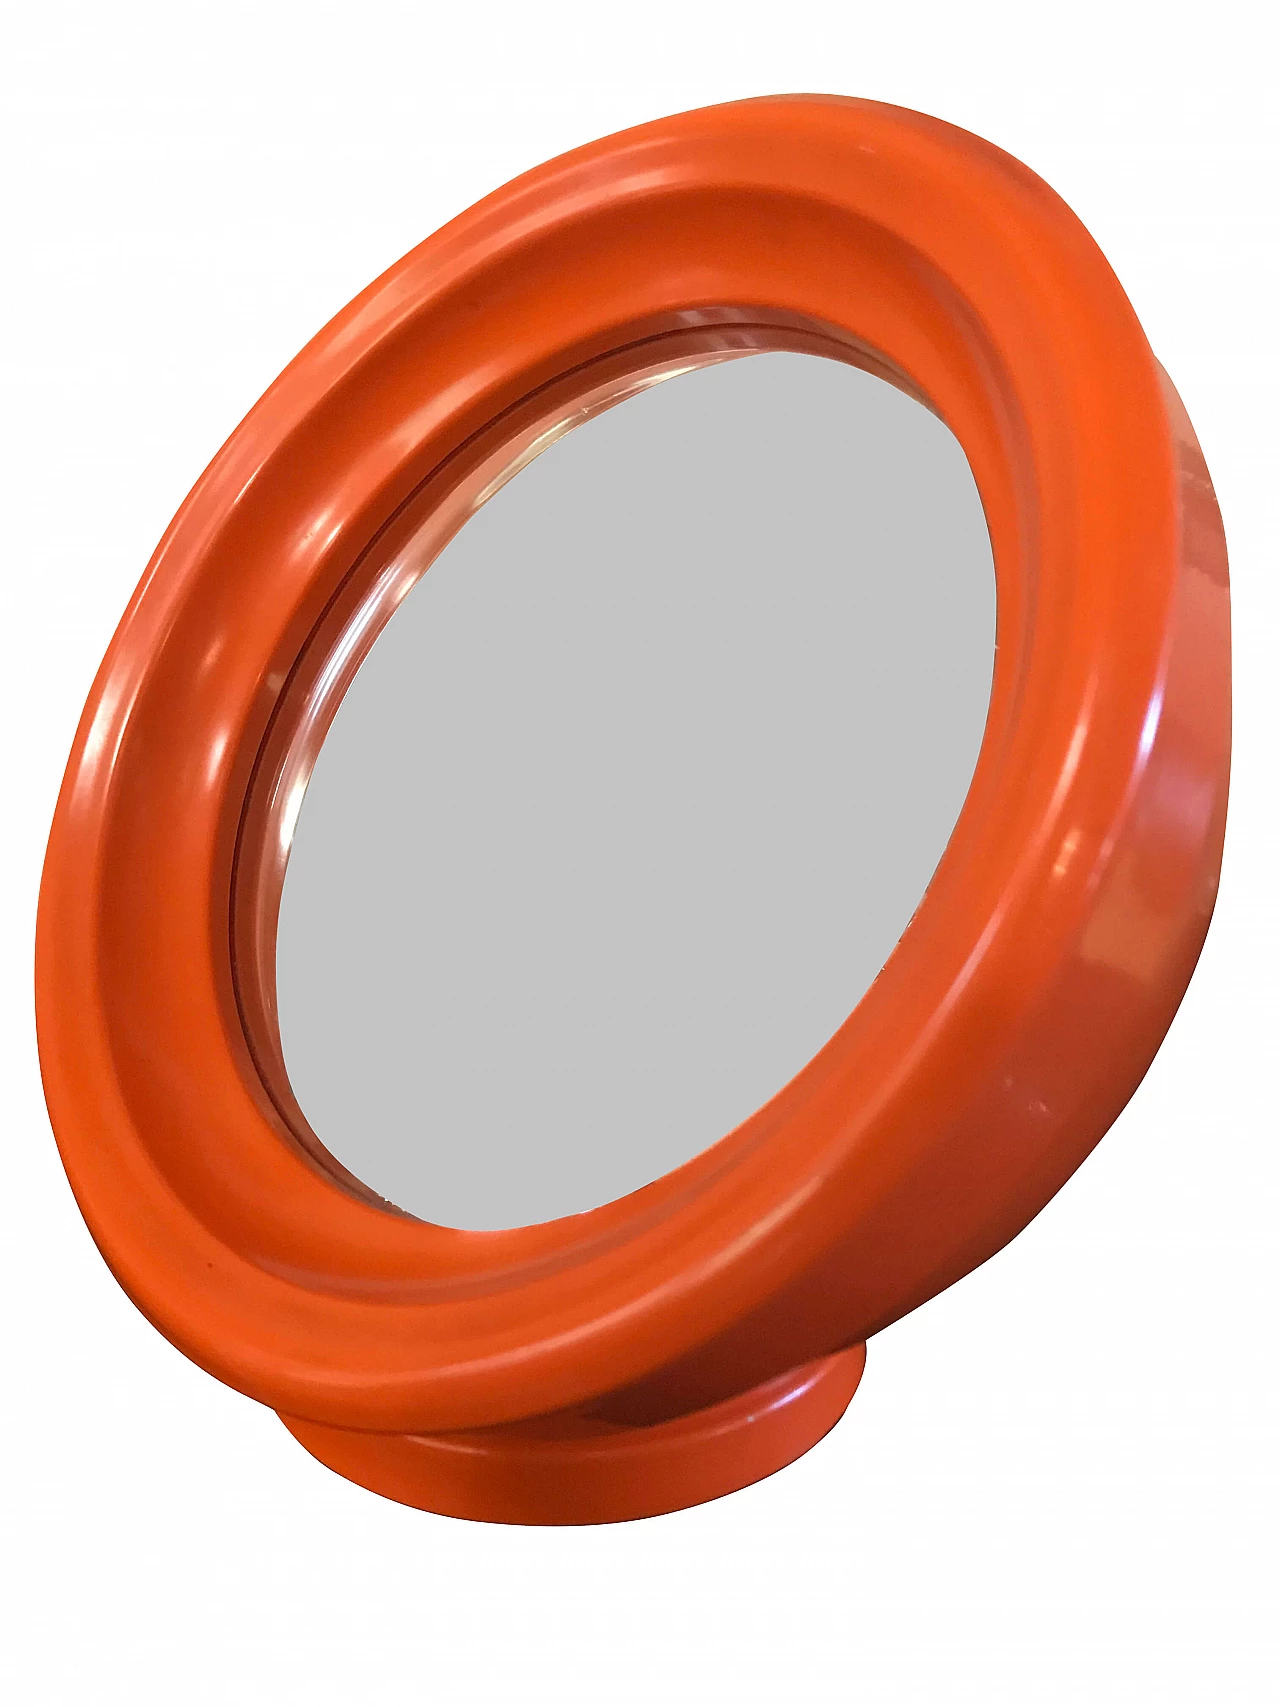 Orientable Space Age mirror on stand, orange, 70s 1182796